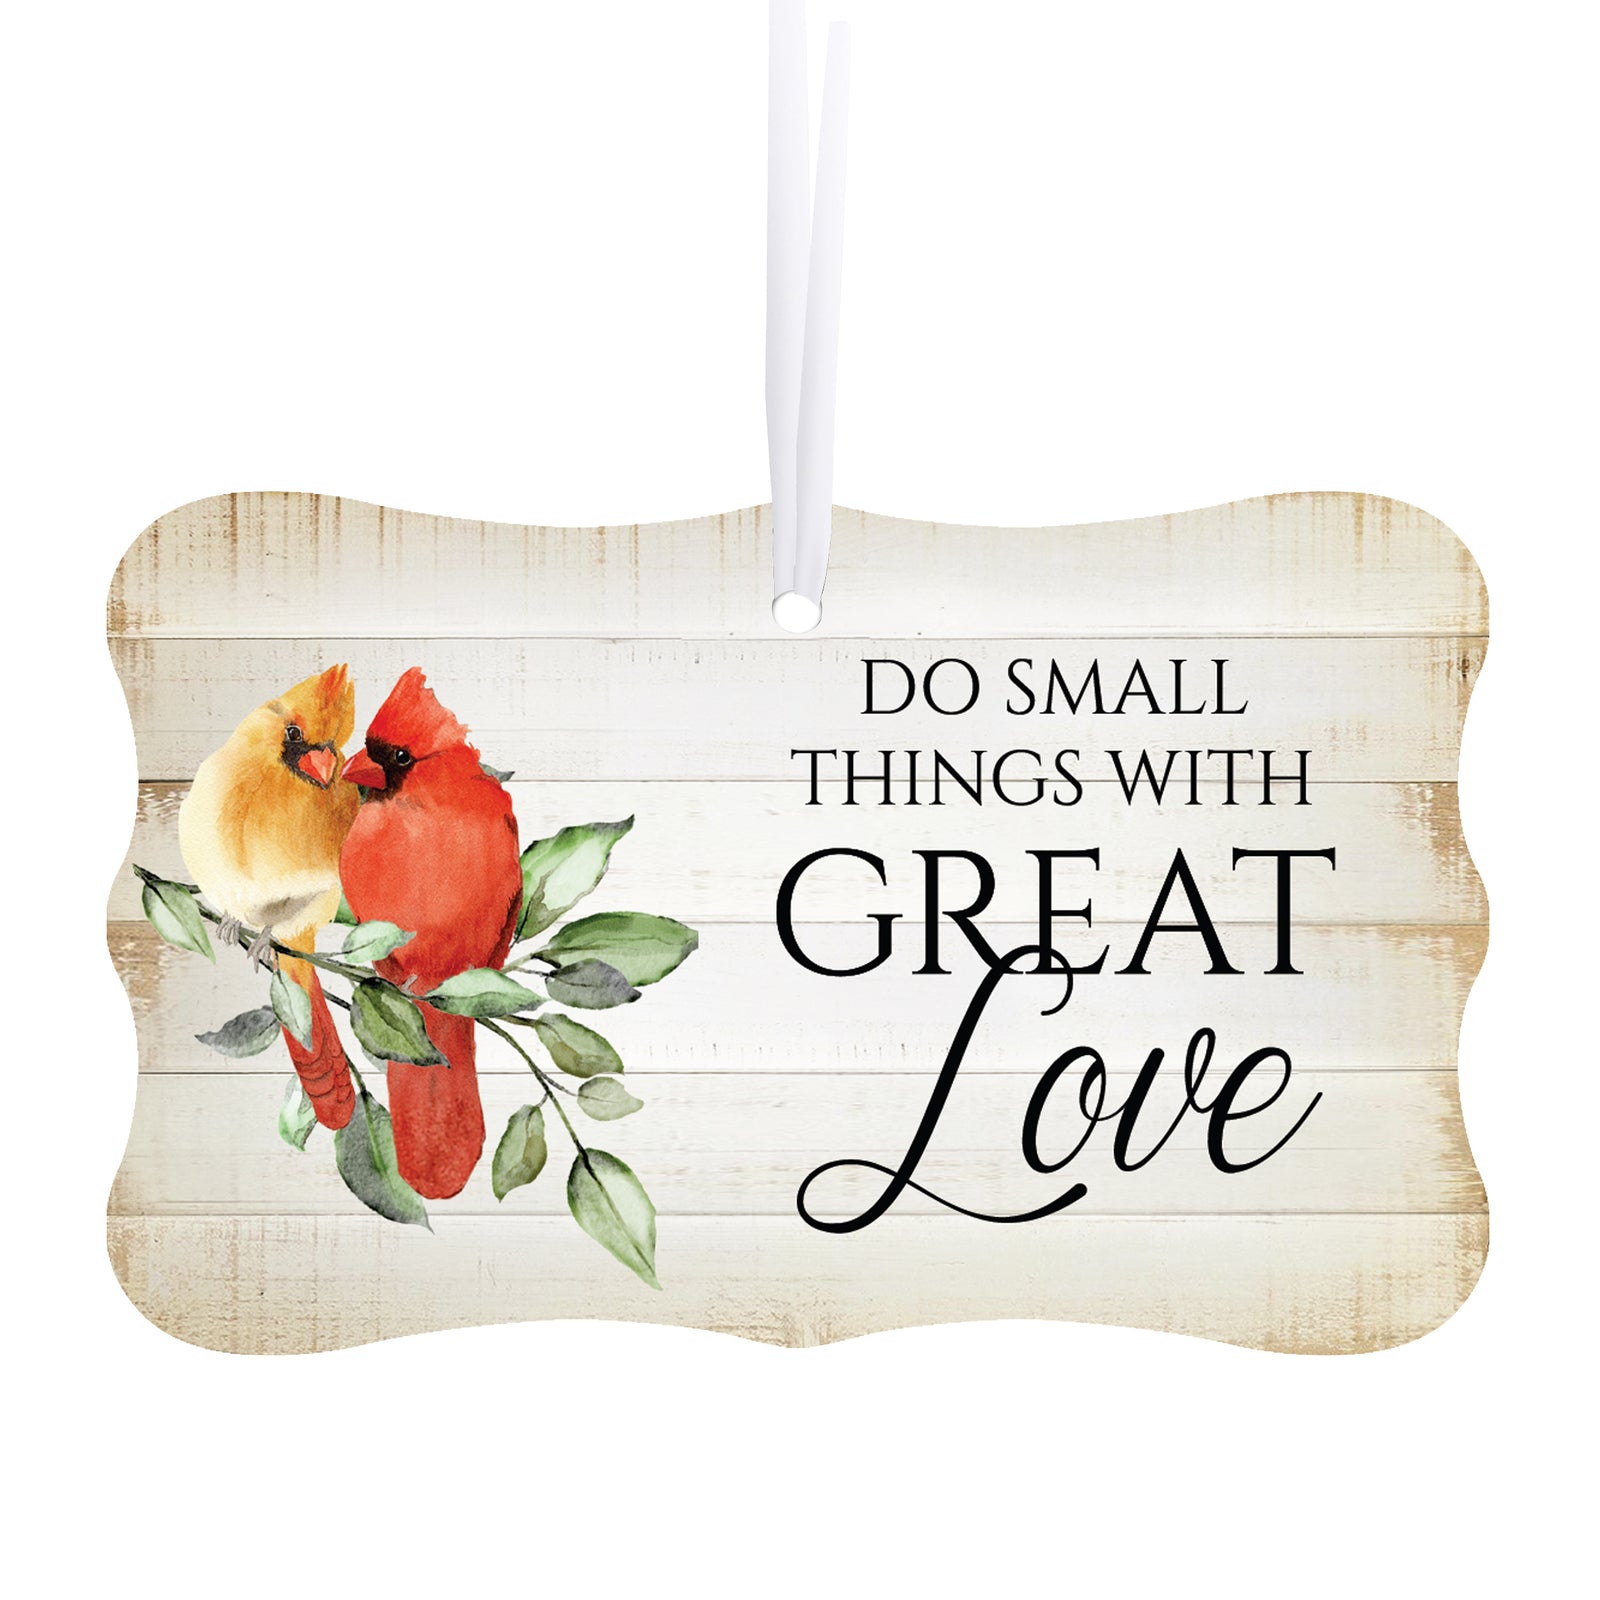 Rustic Scalloped Cardinal Wooden Ornament With Everyday Verses Gift Ideas - Do Small Things